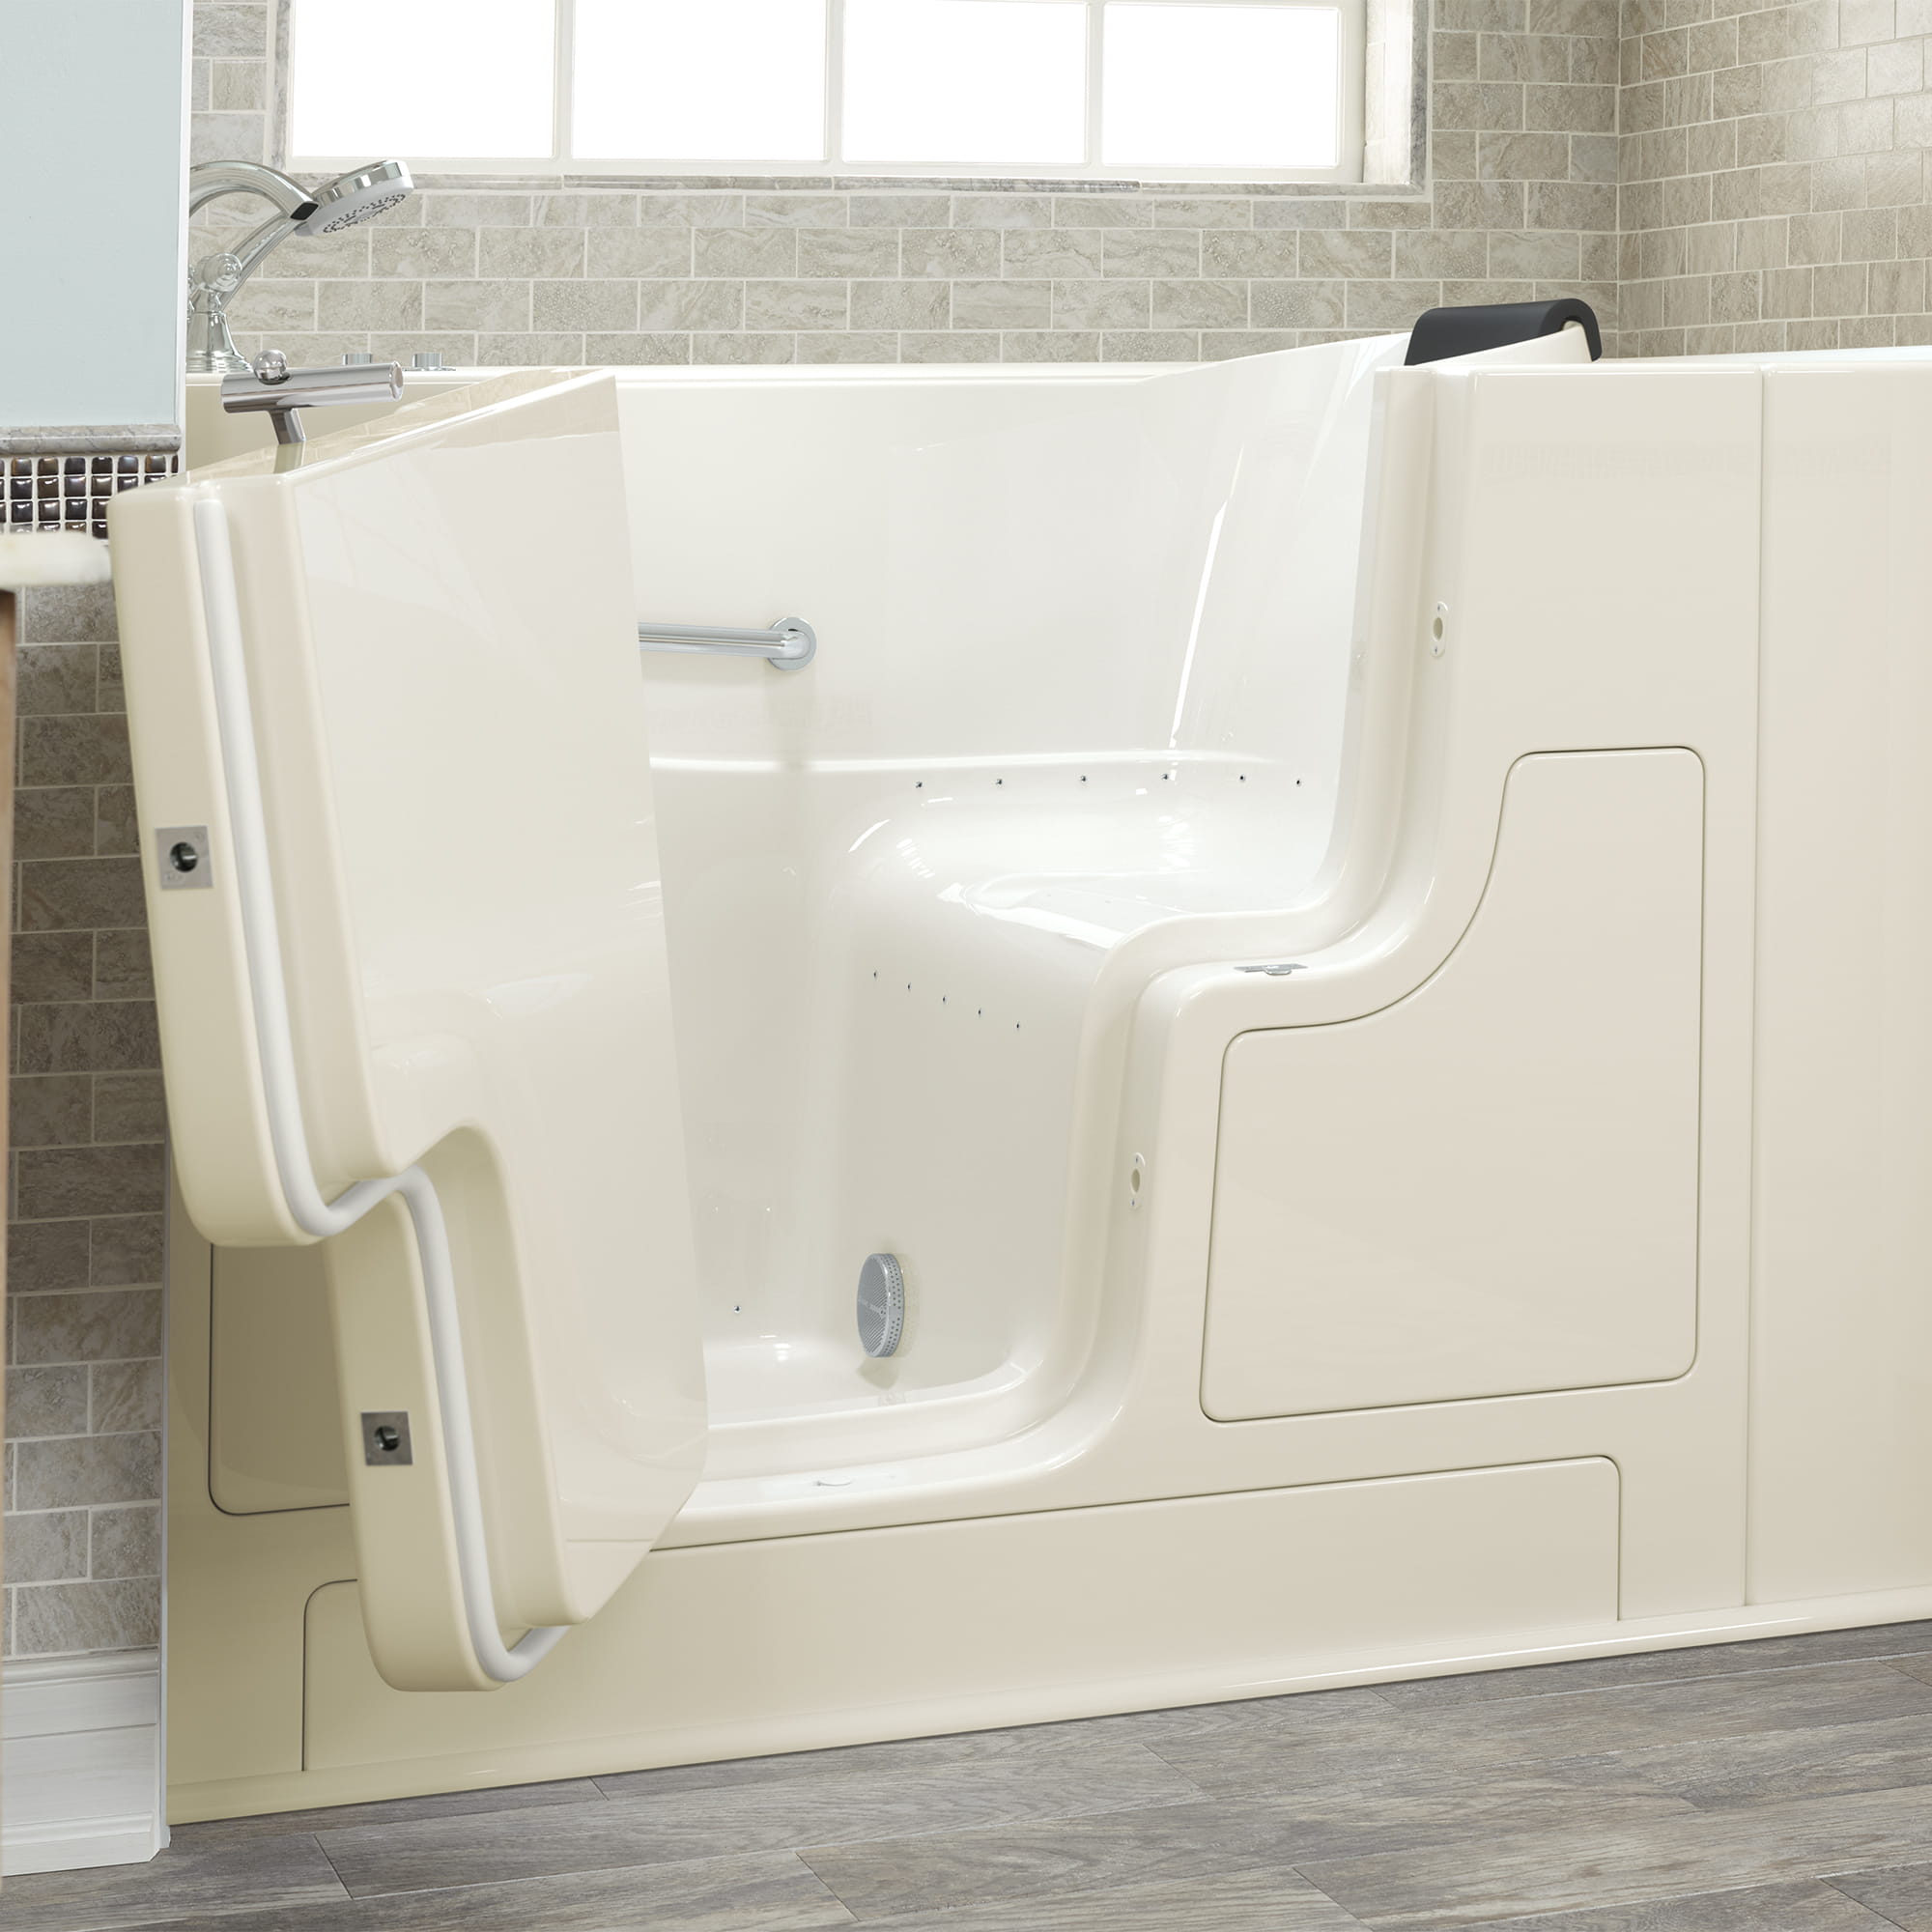 Gelcoat Premium Series 30 x 52 -Inch Walk-in Tub With Air Spa System - Left-Hand Drain With Faucet